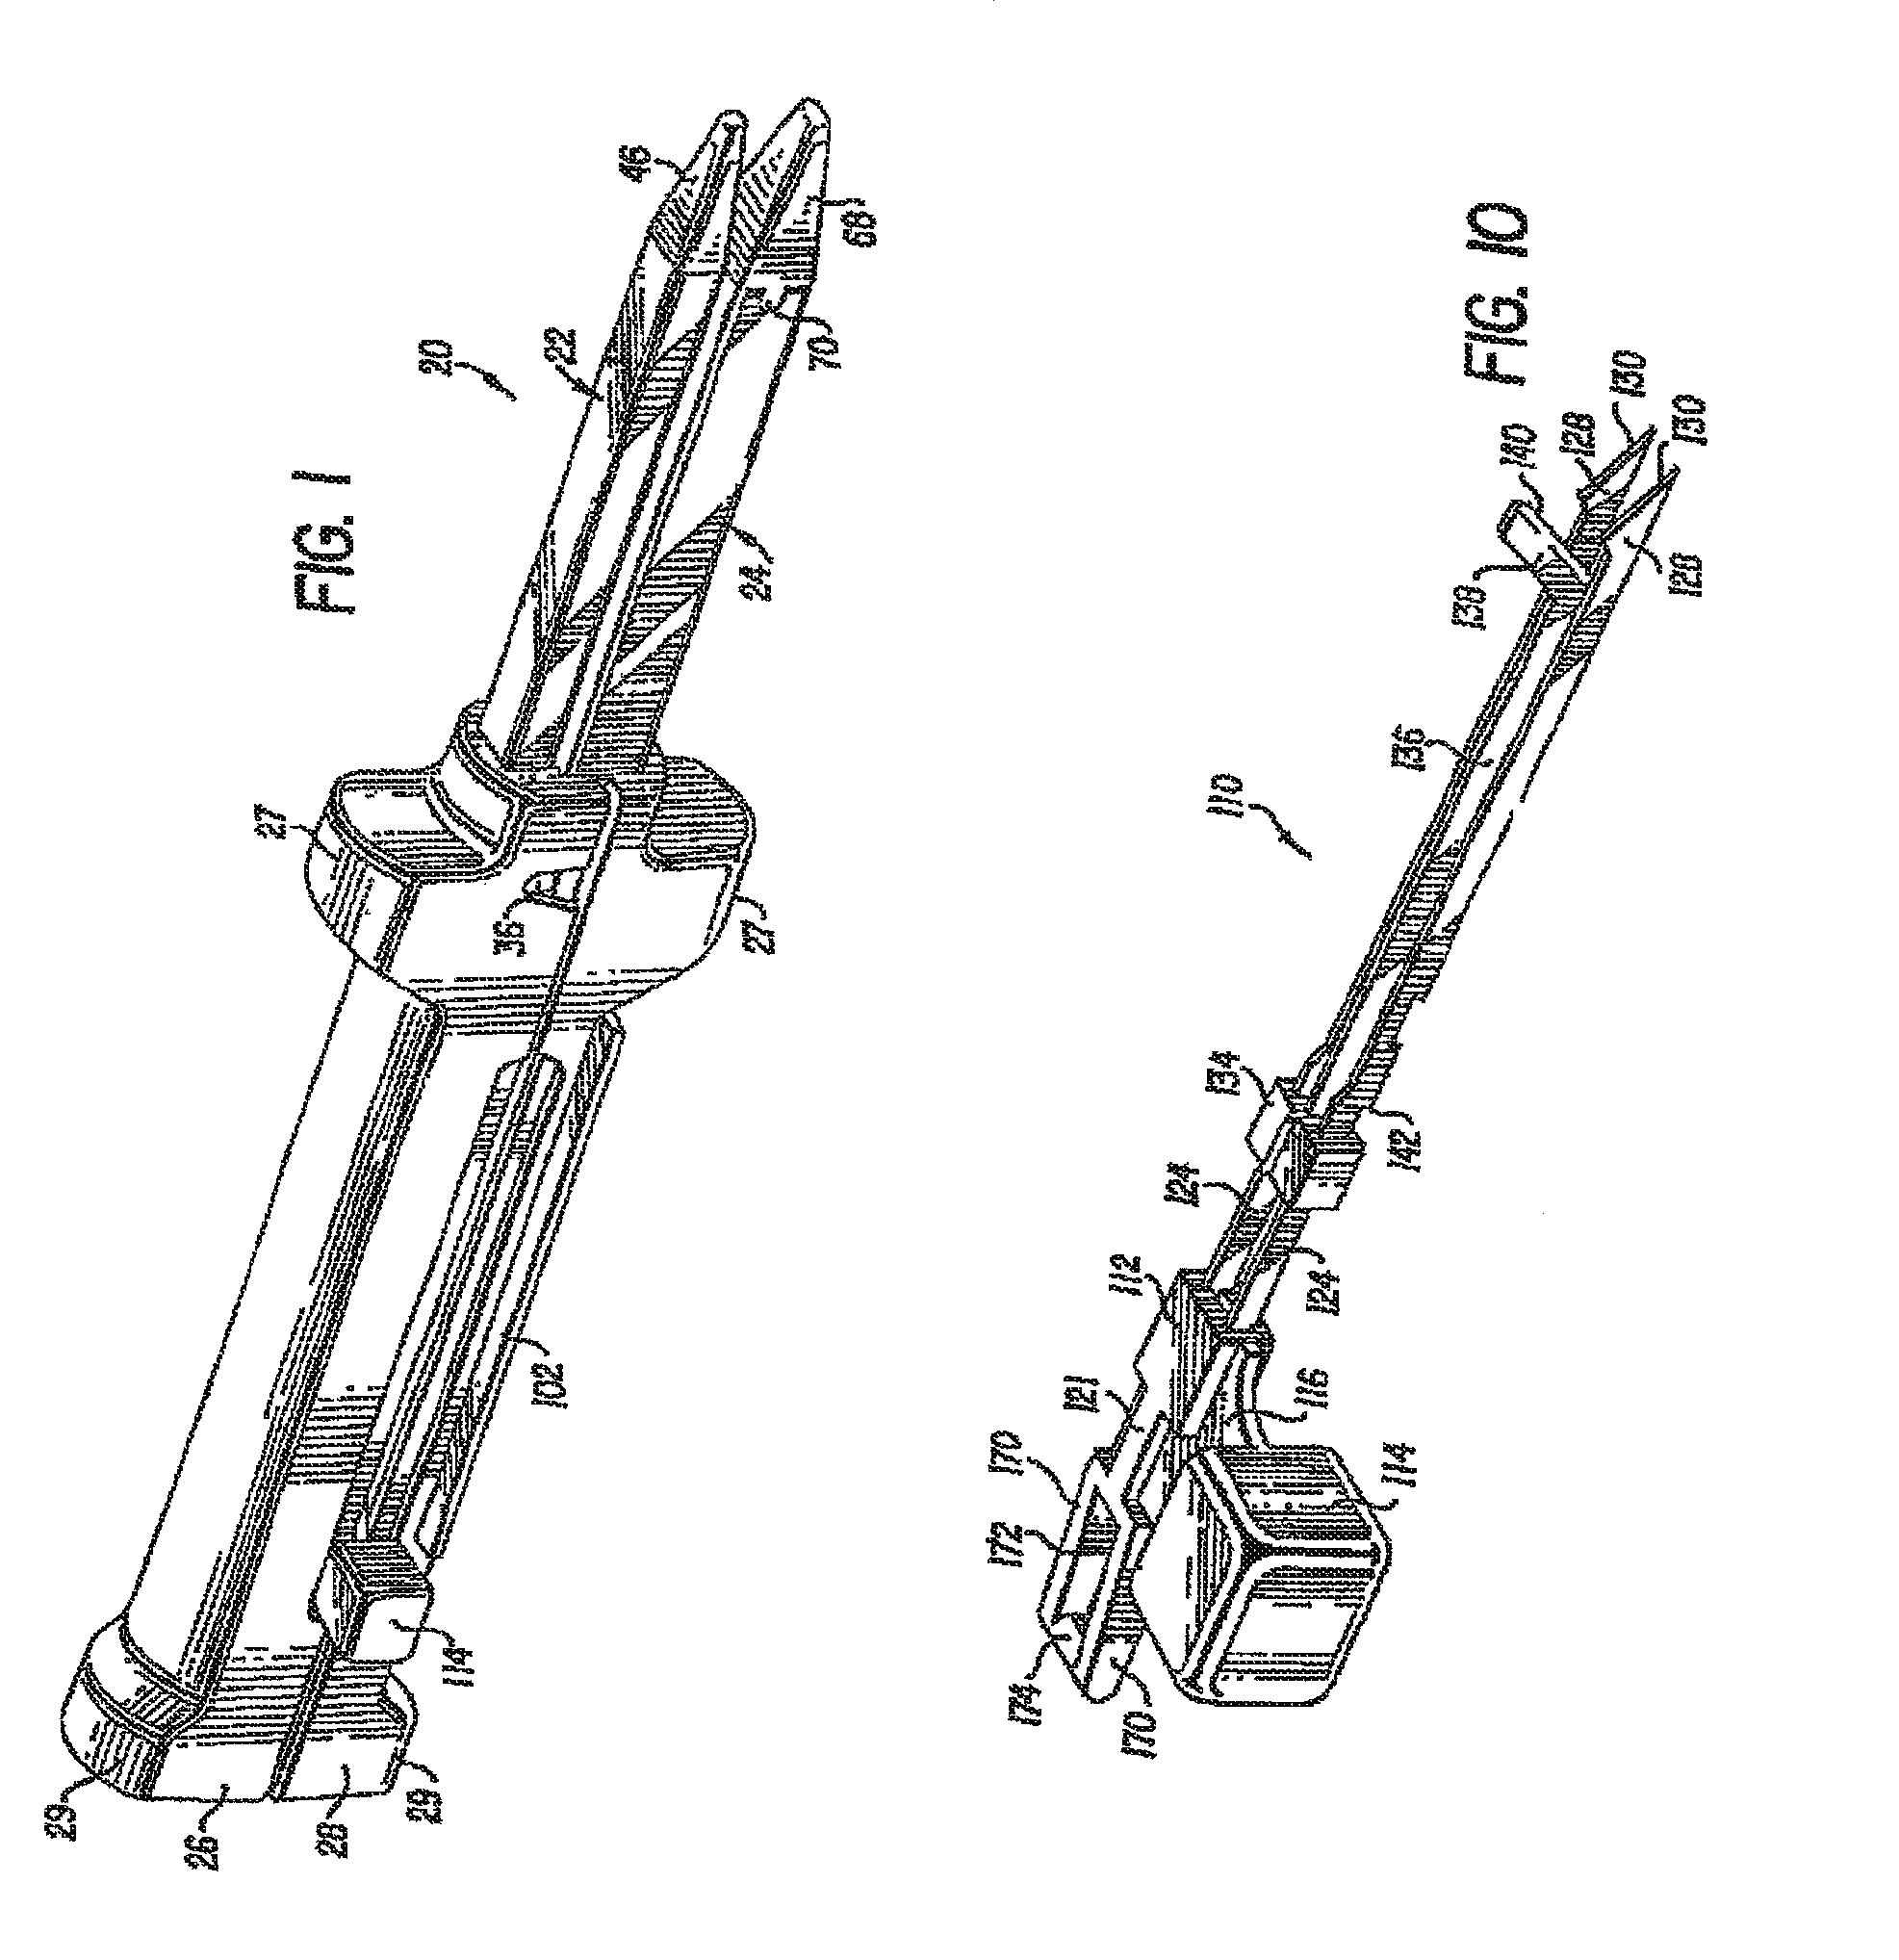 Surgical stapling instrument with improved firing trigger arrangement